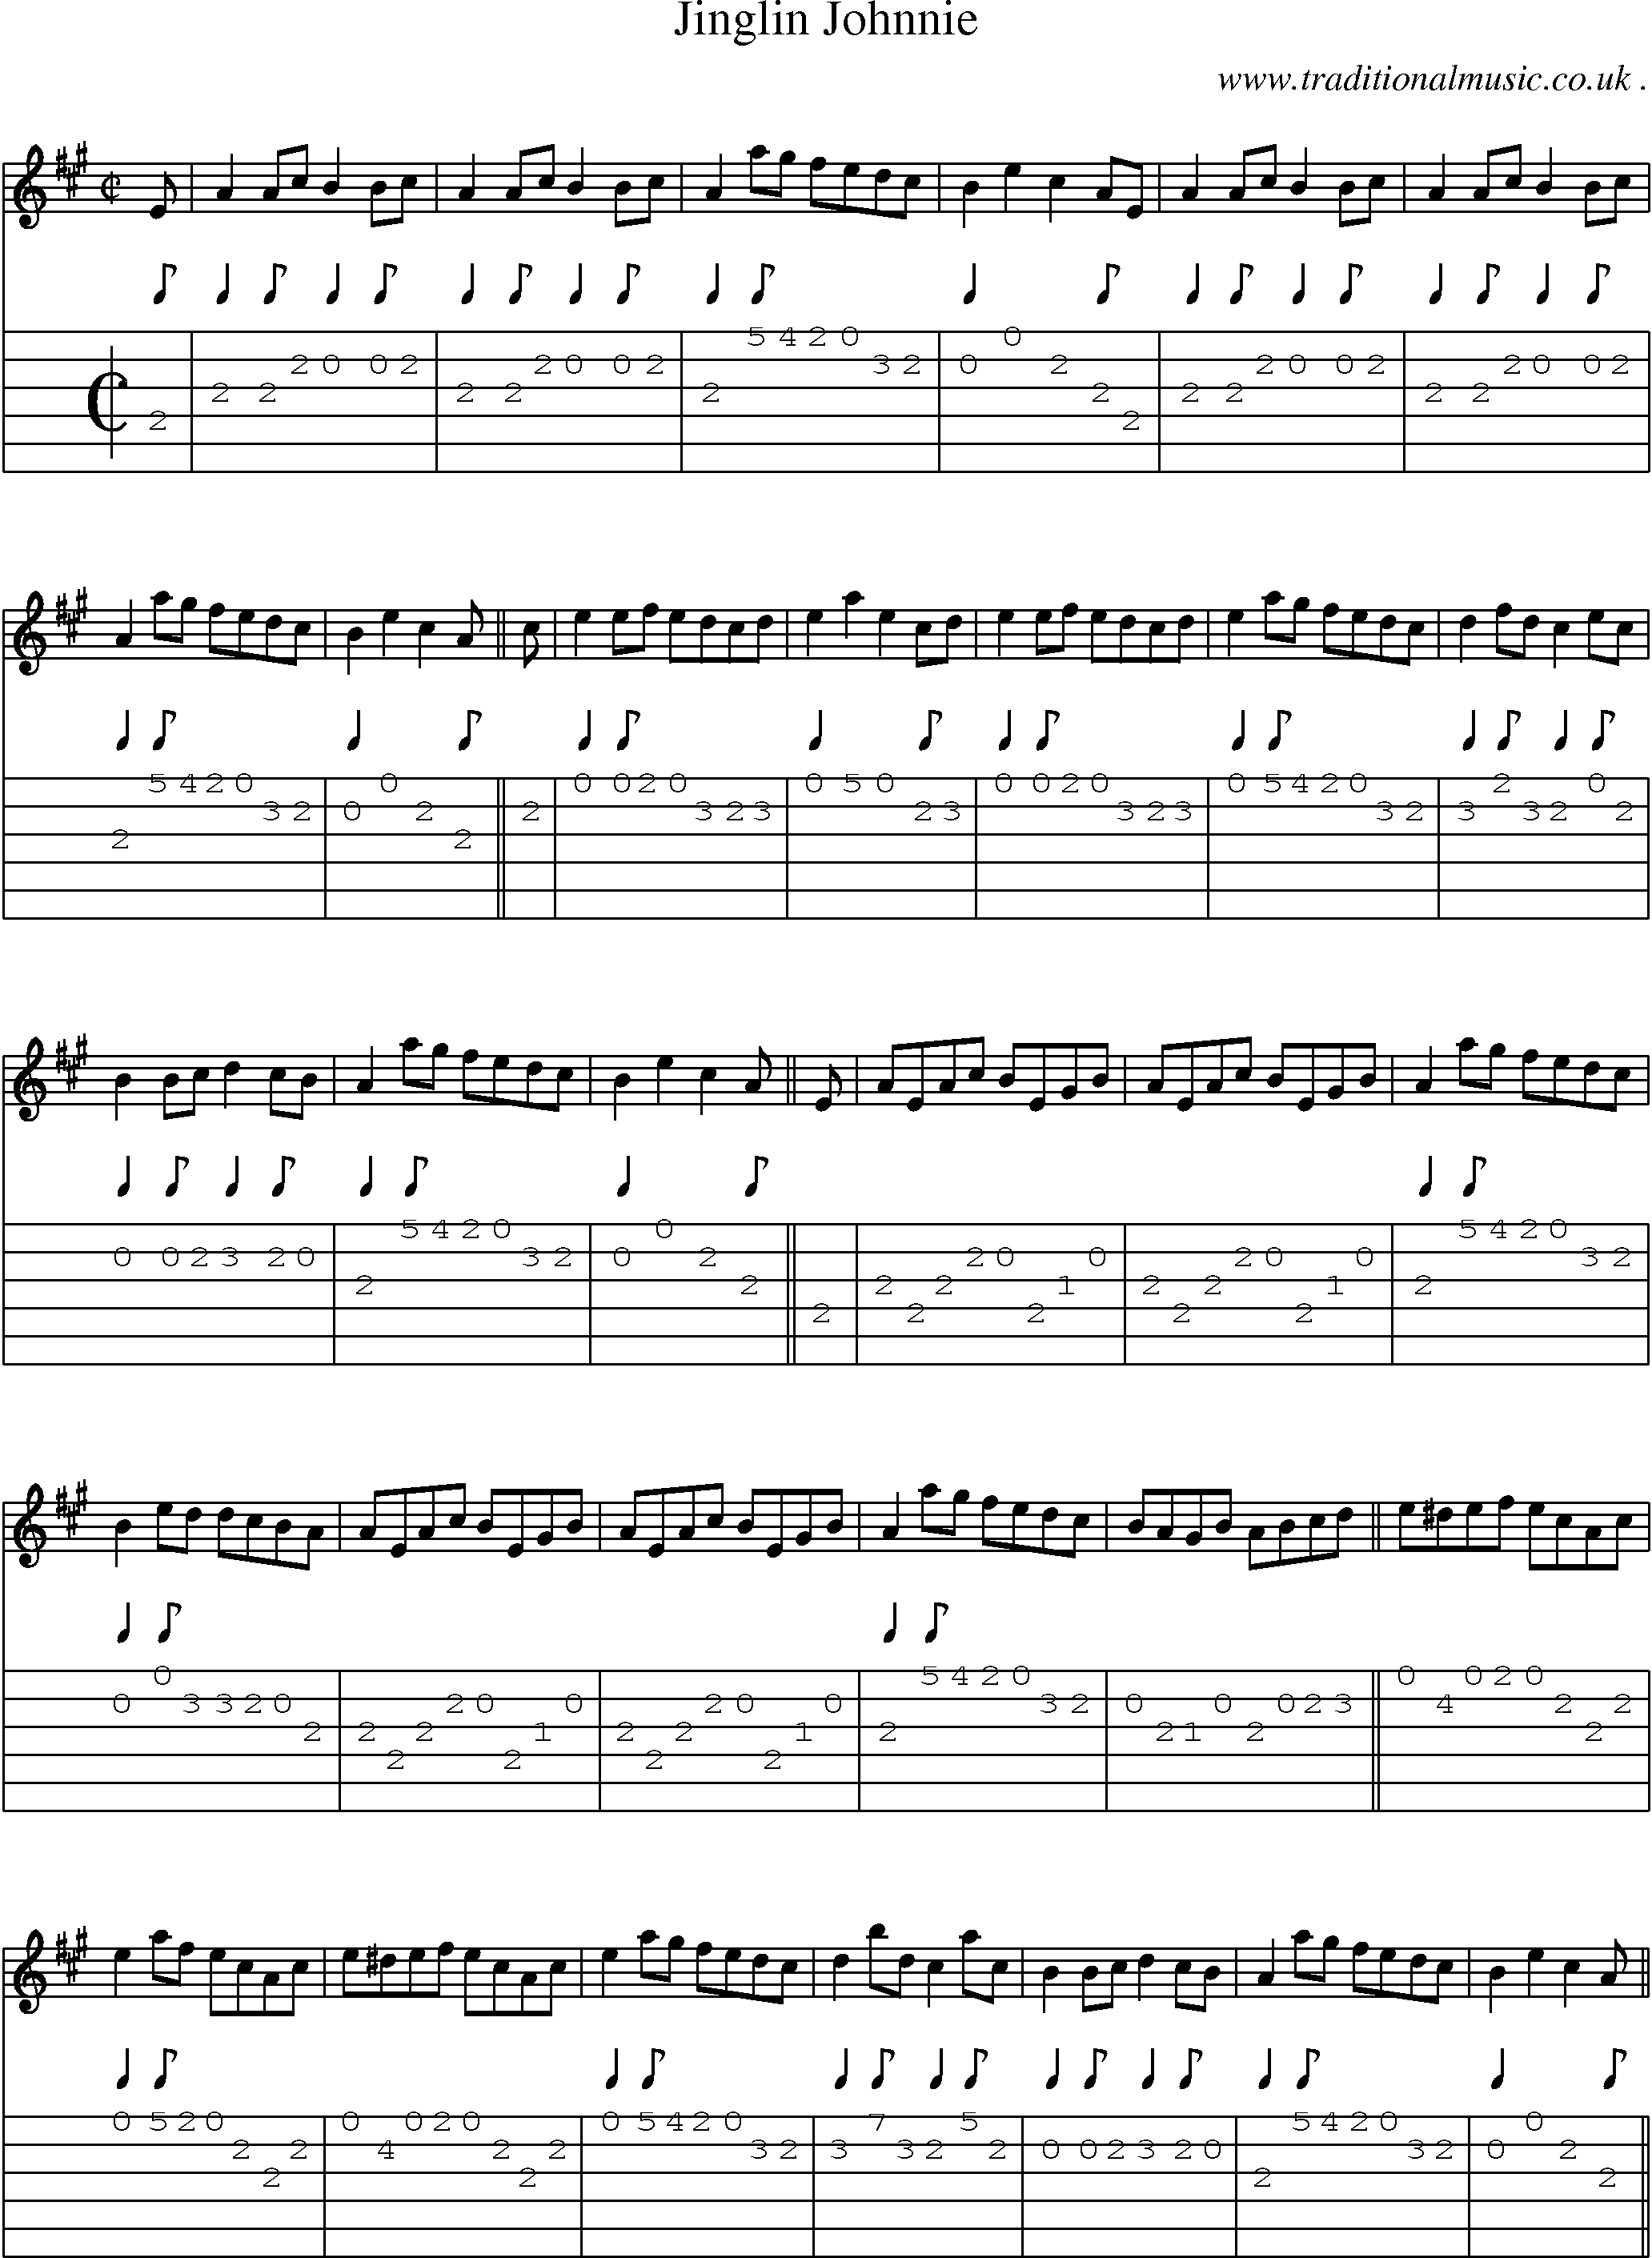 Sheet-music  score, Chords and Guitar Tabs for Jinglin Johnnie